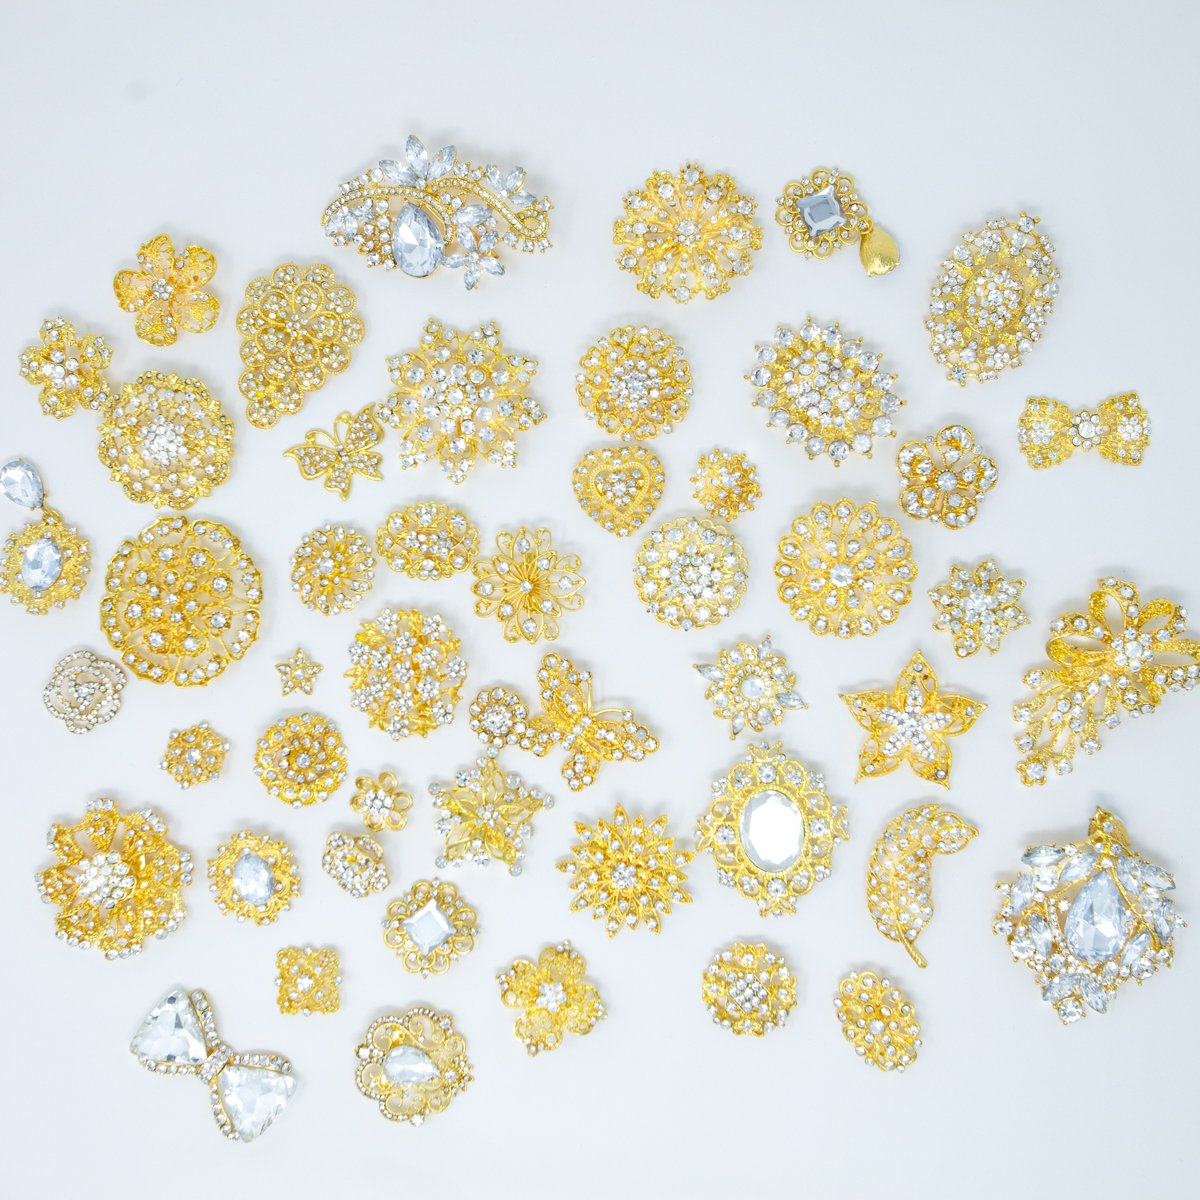 Vintage Gold and Silver Nail Rhinestones - Set of 50 Mixed Flatback  Decorations 